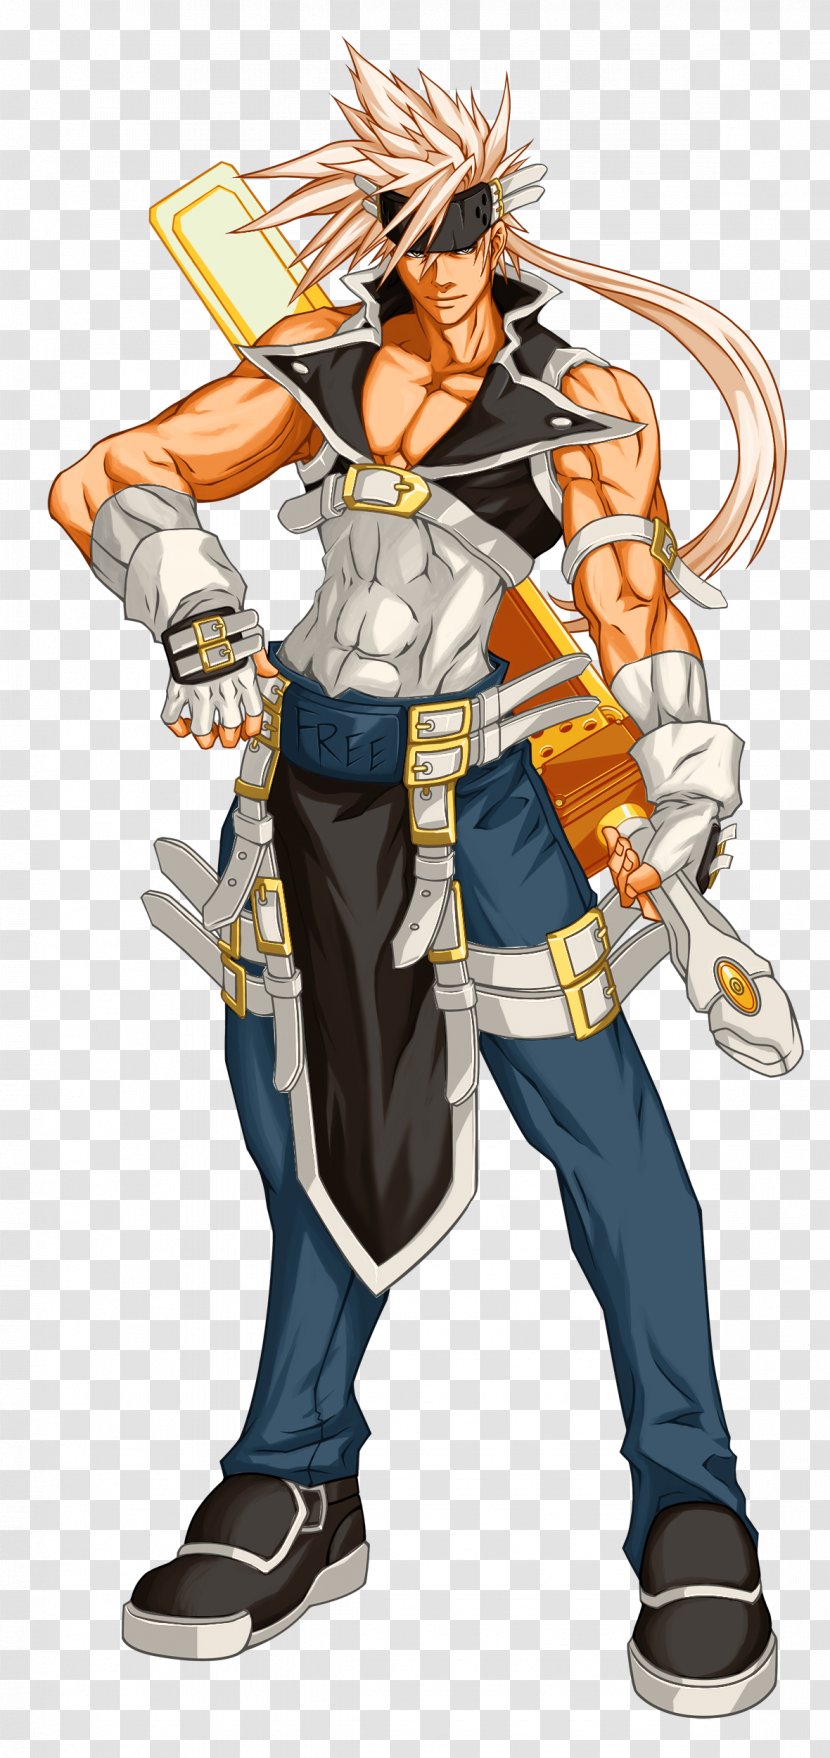 Sol Badguy Guilty Gear Xrd Art Character - Tree Transparent PNG